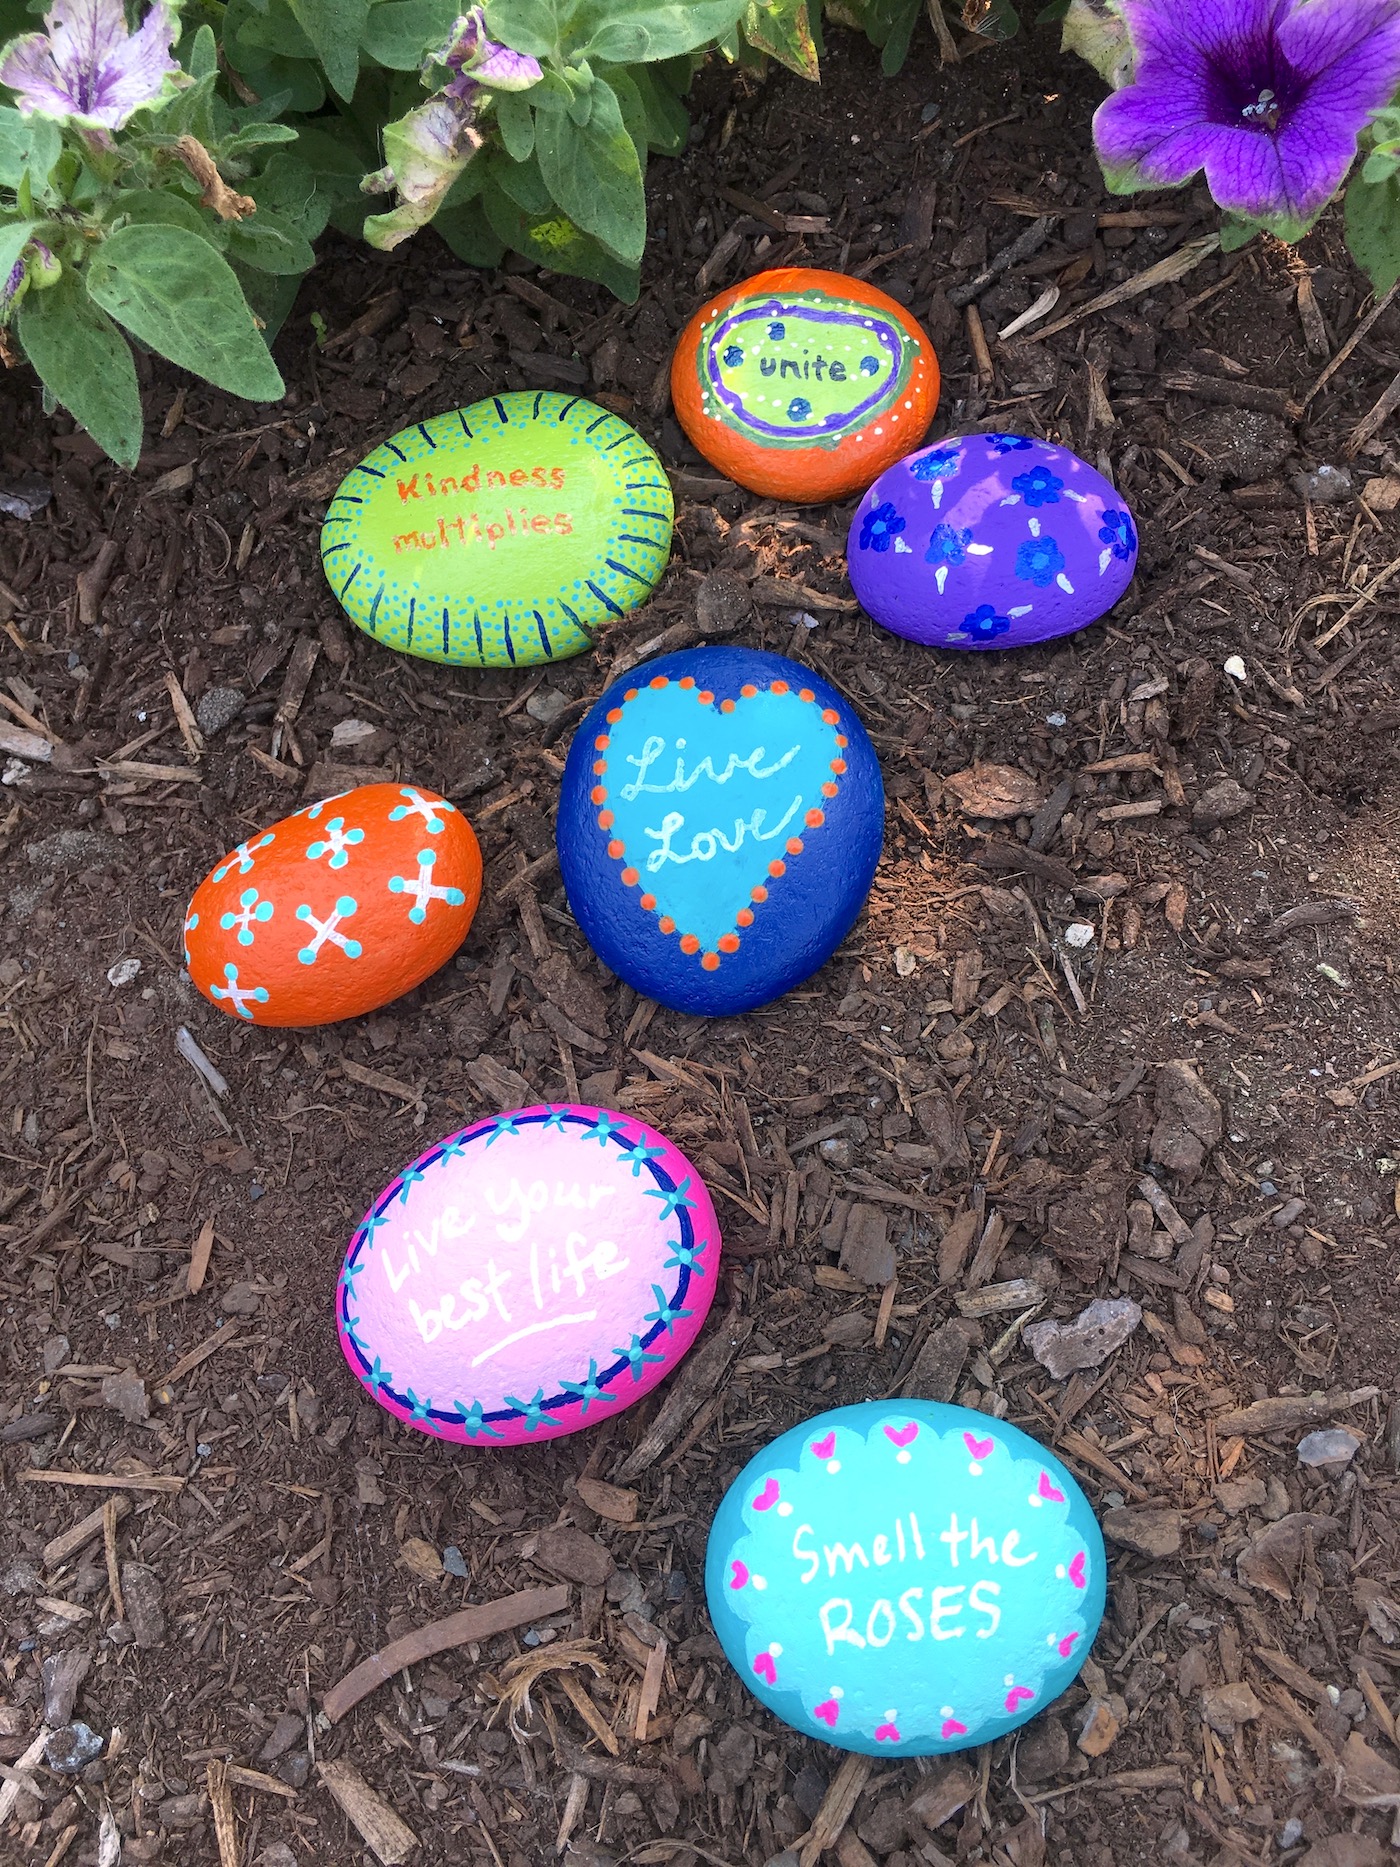 painted rocks laying in a garden bed